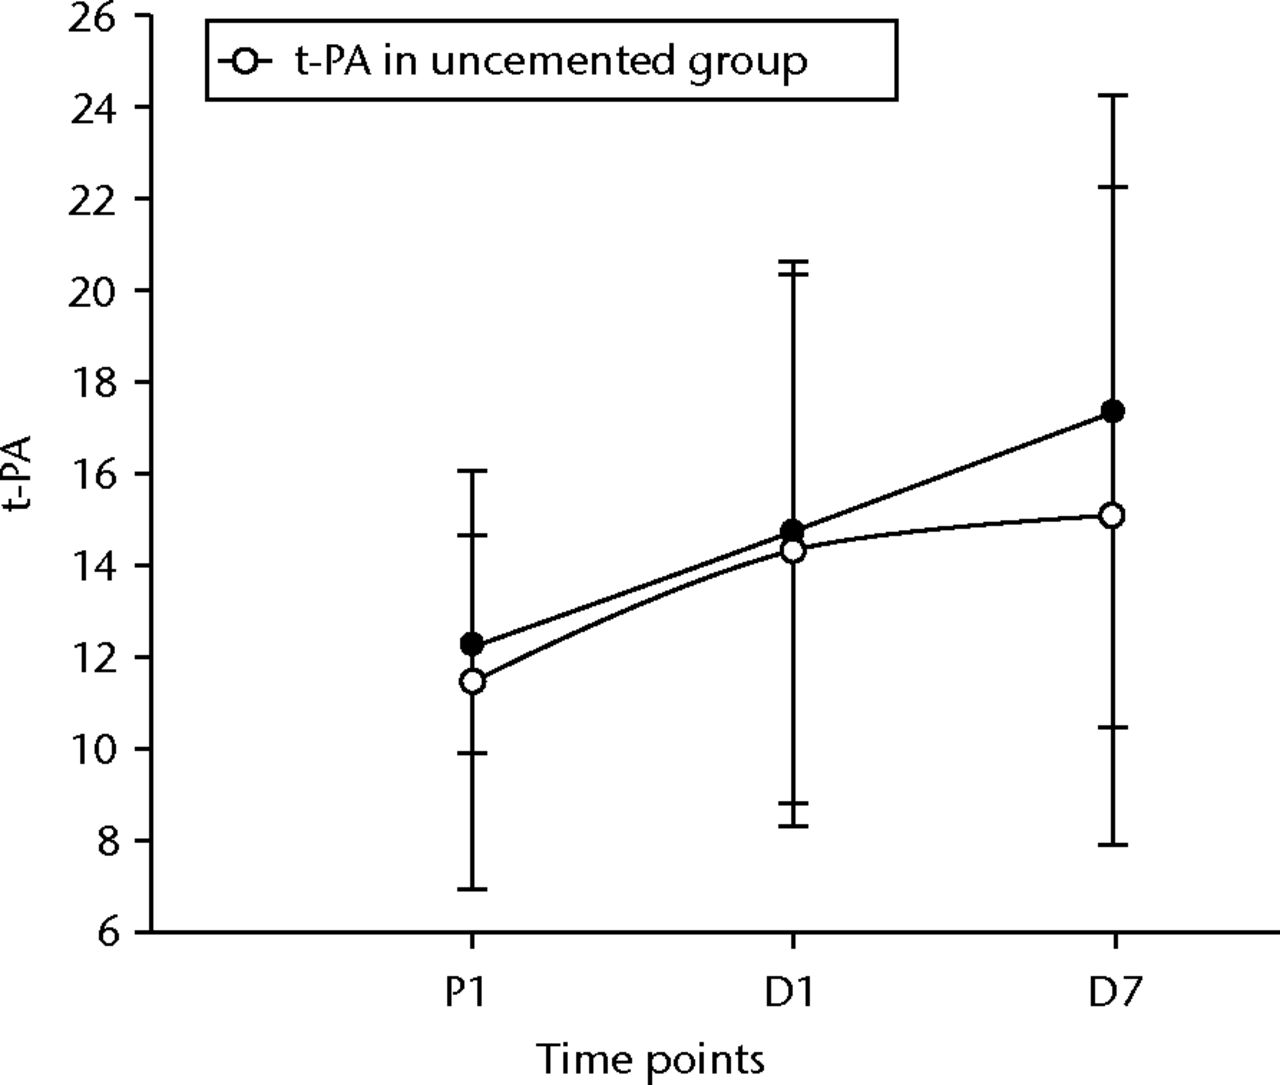 Fig. 3 
            Graph of changes in tissue plasminogen
activator levels (t-PA) (ng/ml) over the three time points (mean
and standard deviation) in the cemented total knee replacement (TKR)
group (n = 19) against the uncemented TKR group (n = 19)
          